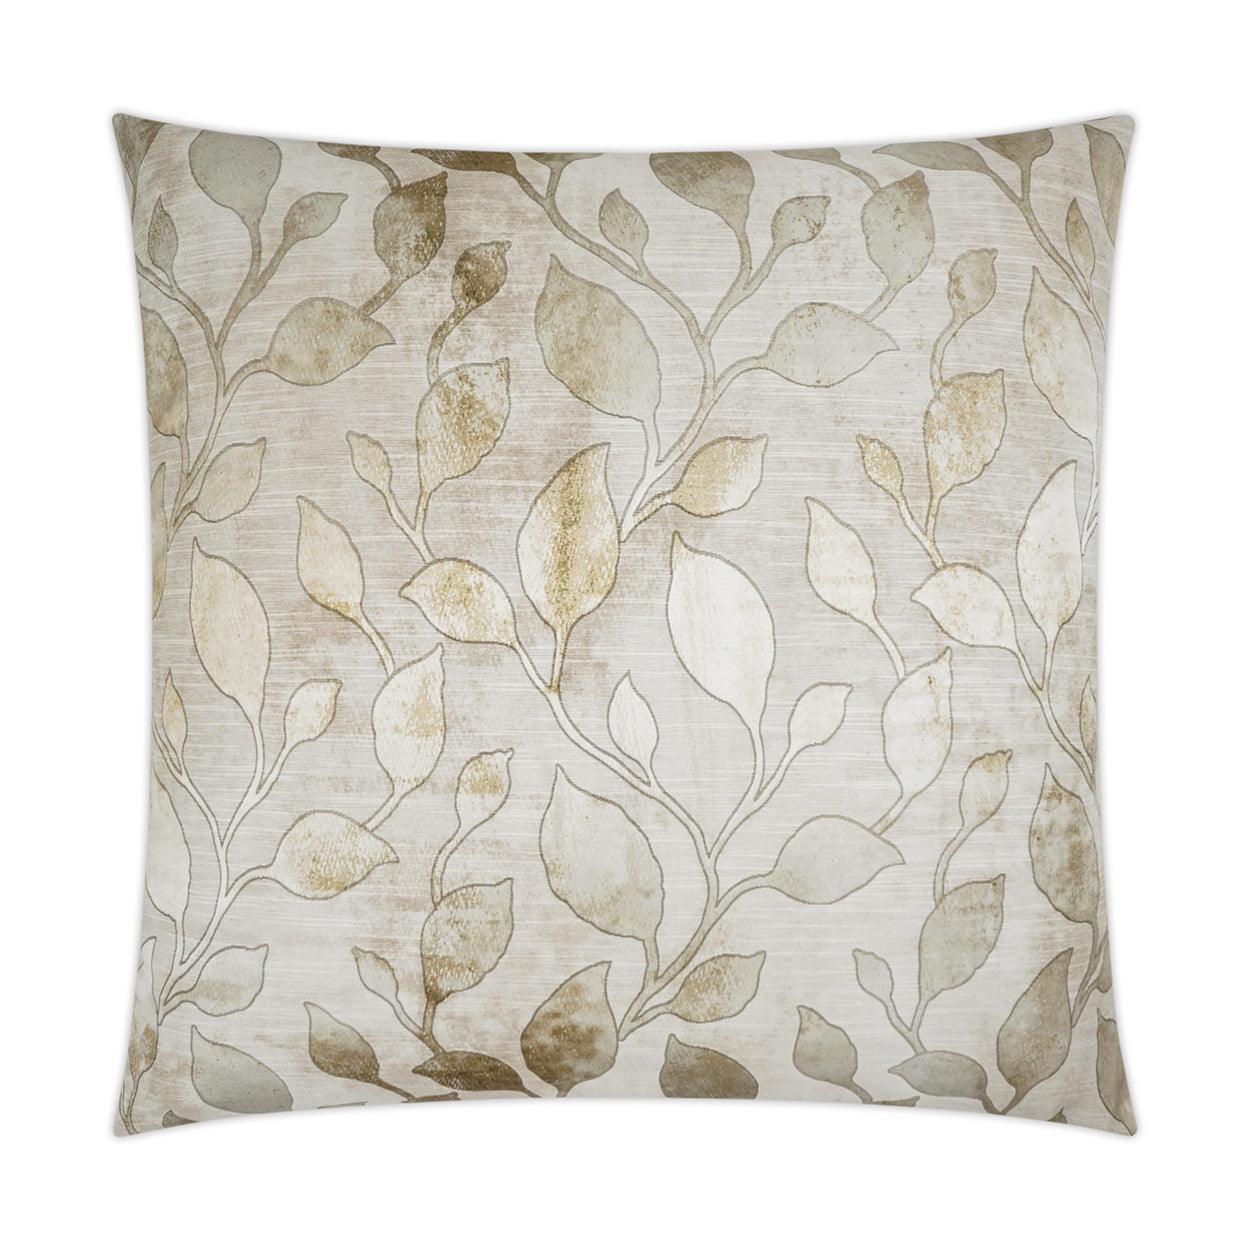 Zafra Glam Floral Gold Tan Taupe Large Throw Pillow With Insert - Uptown Sebastian